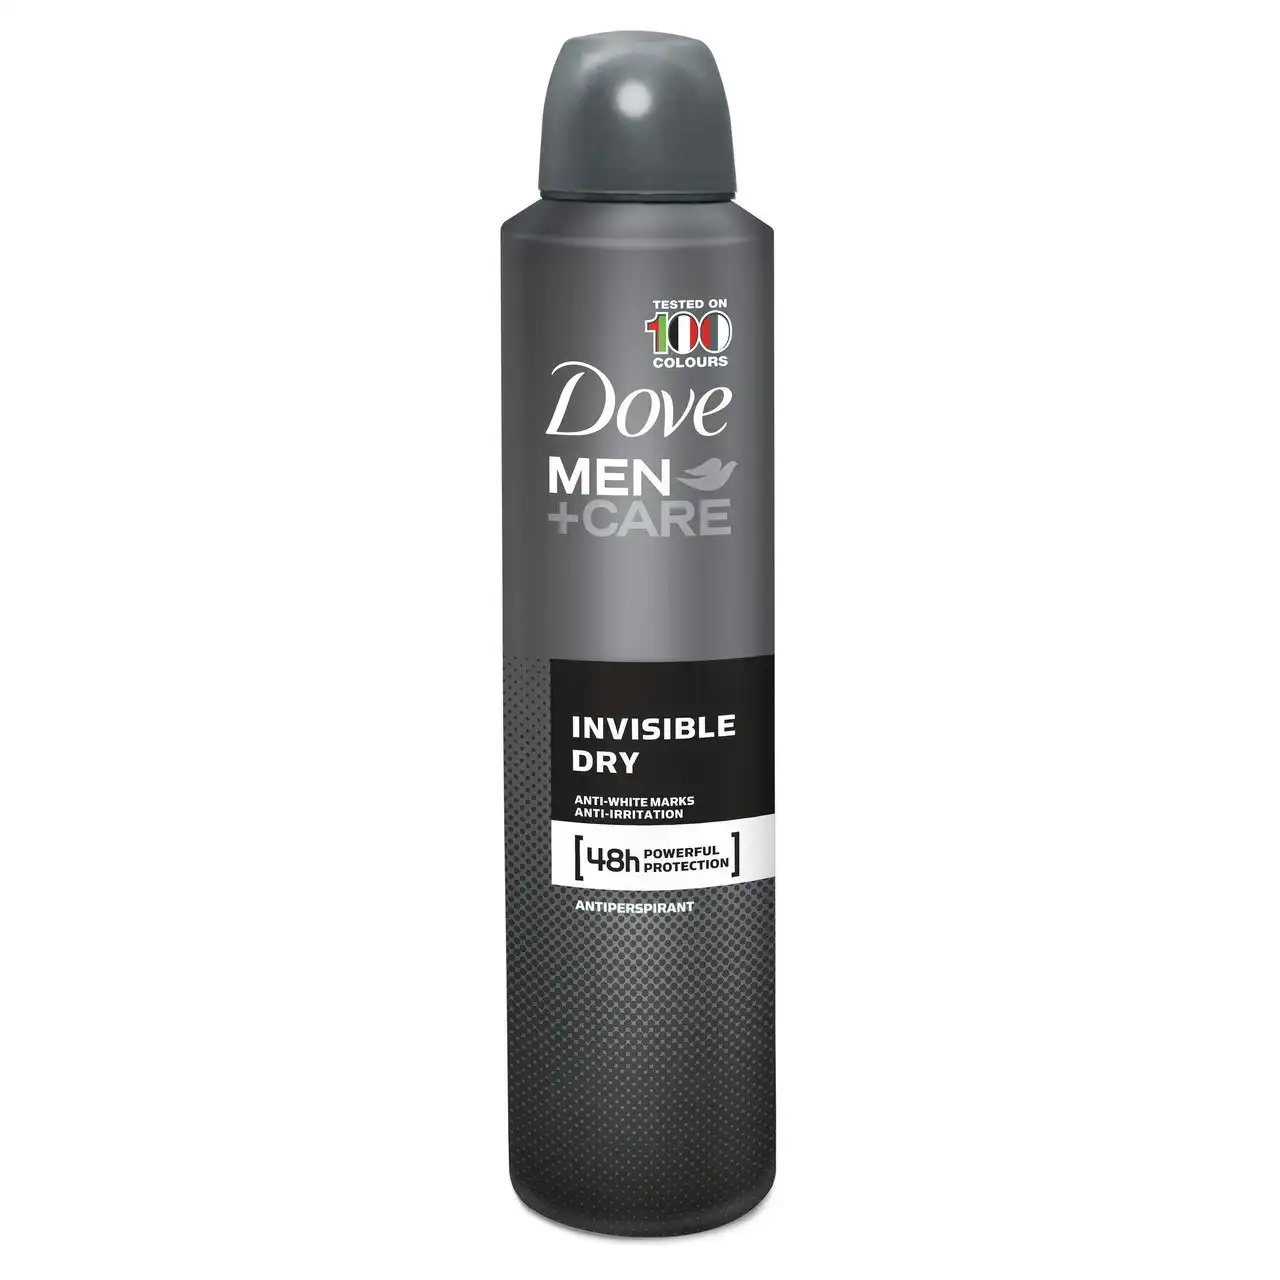 Dove Men+Care Antiperspirant Aerosol Deodorant Invisible Dry Helps fight sweat and odour for up to 48 hours 254ml 1